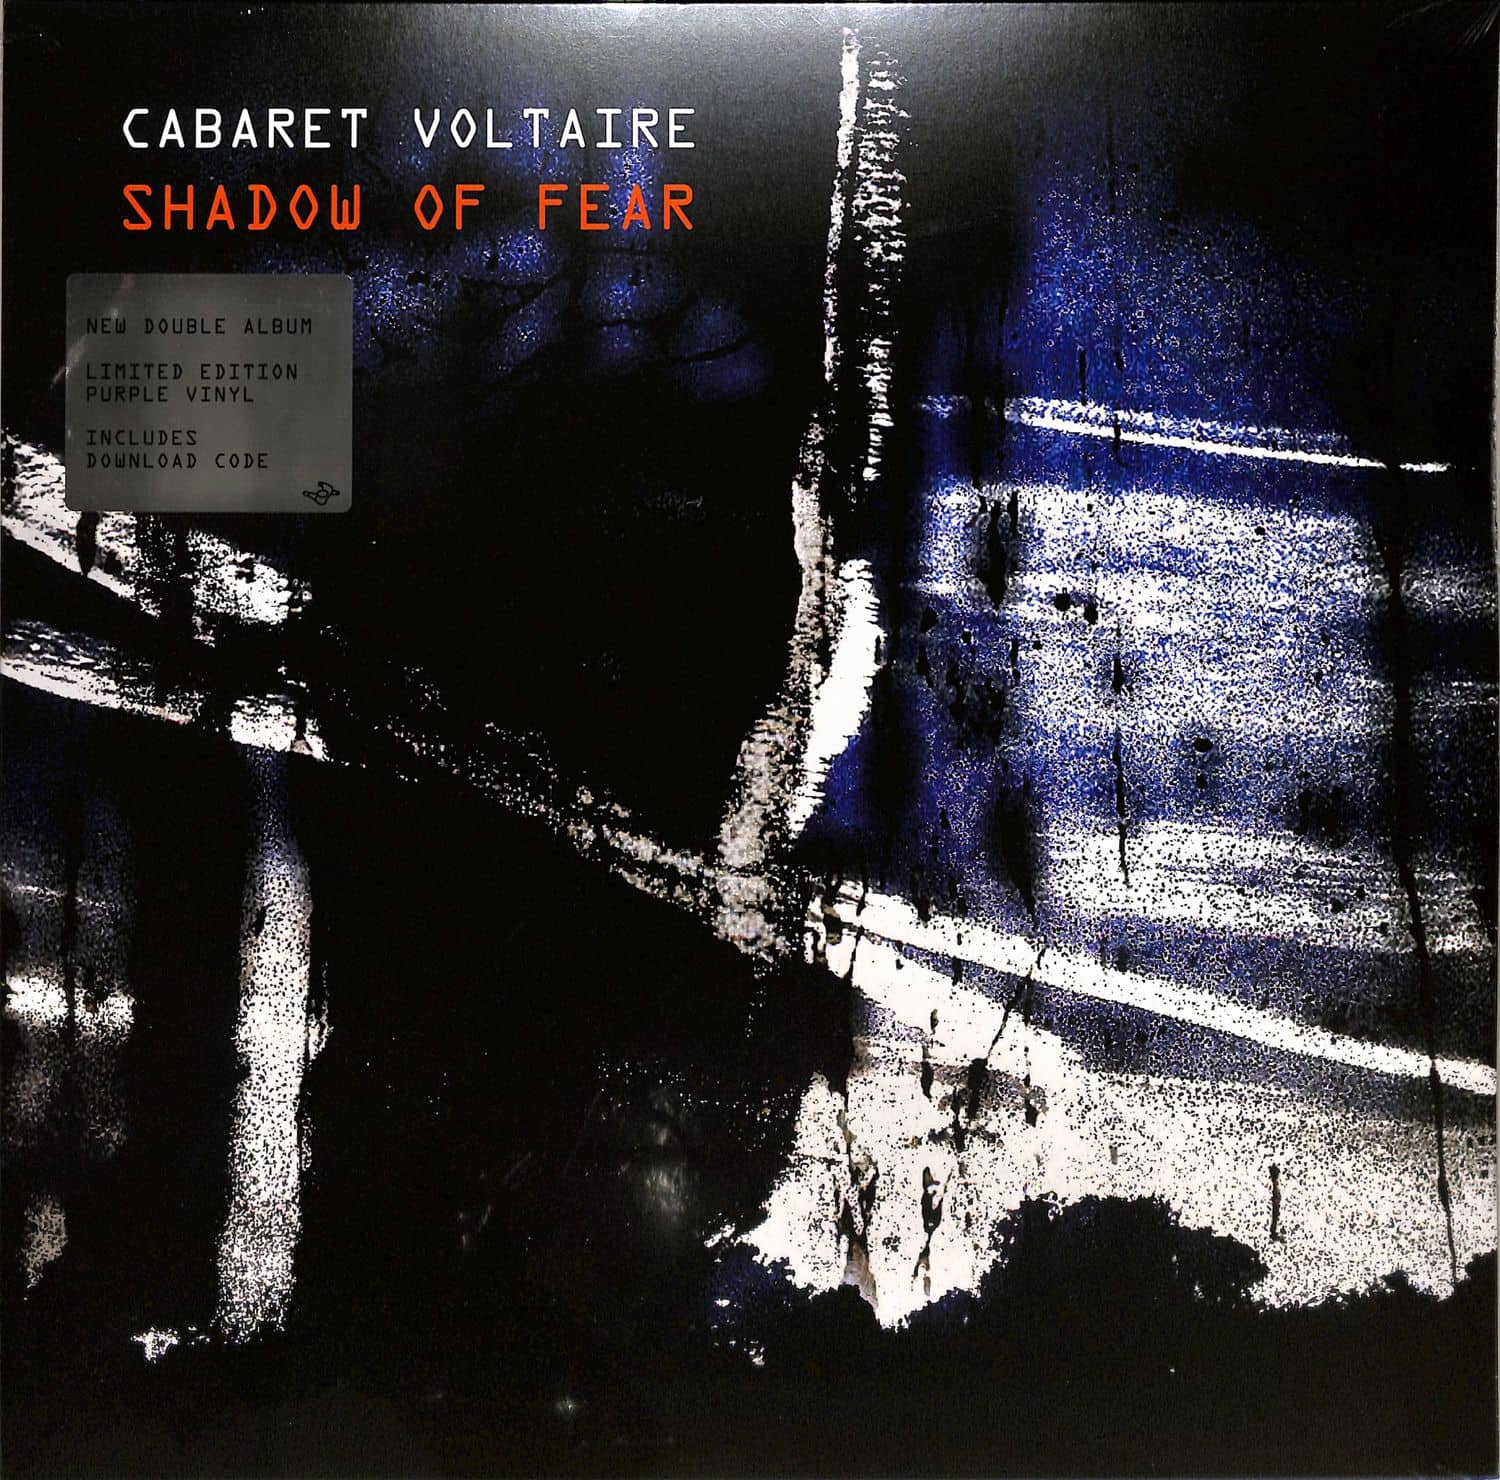 Cabaret Voltaire - SHADOW OF FEAR 